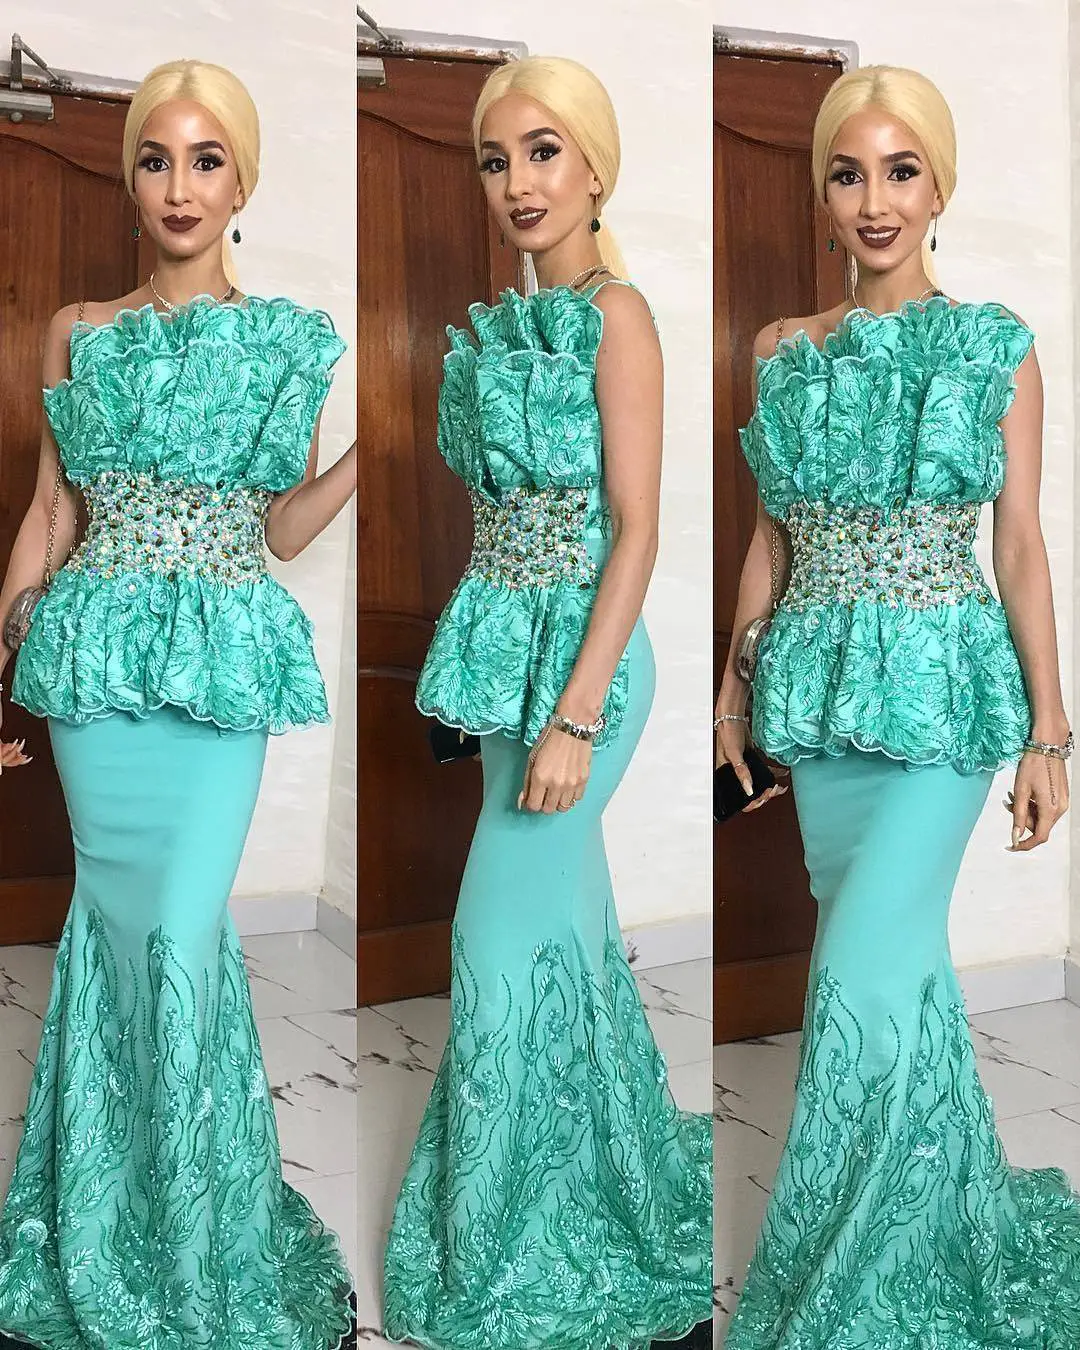 Keeping It Sweet And Sassy In Exquisite Latest Asoebi Styles